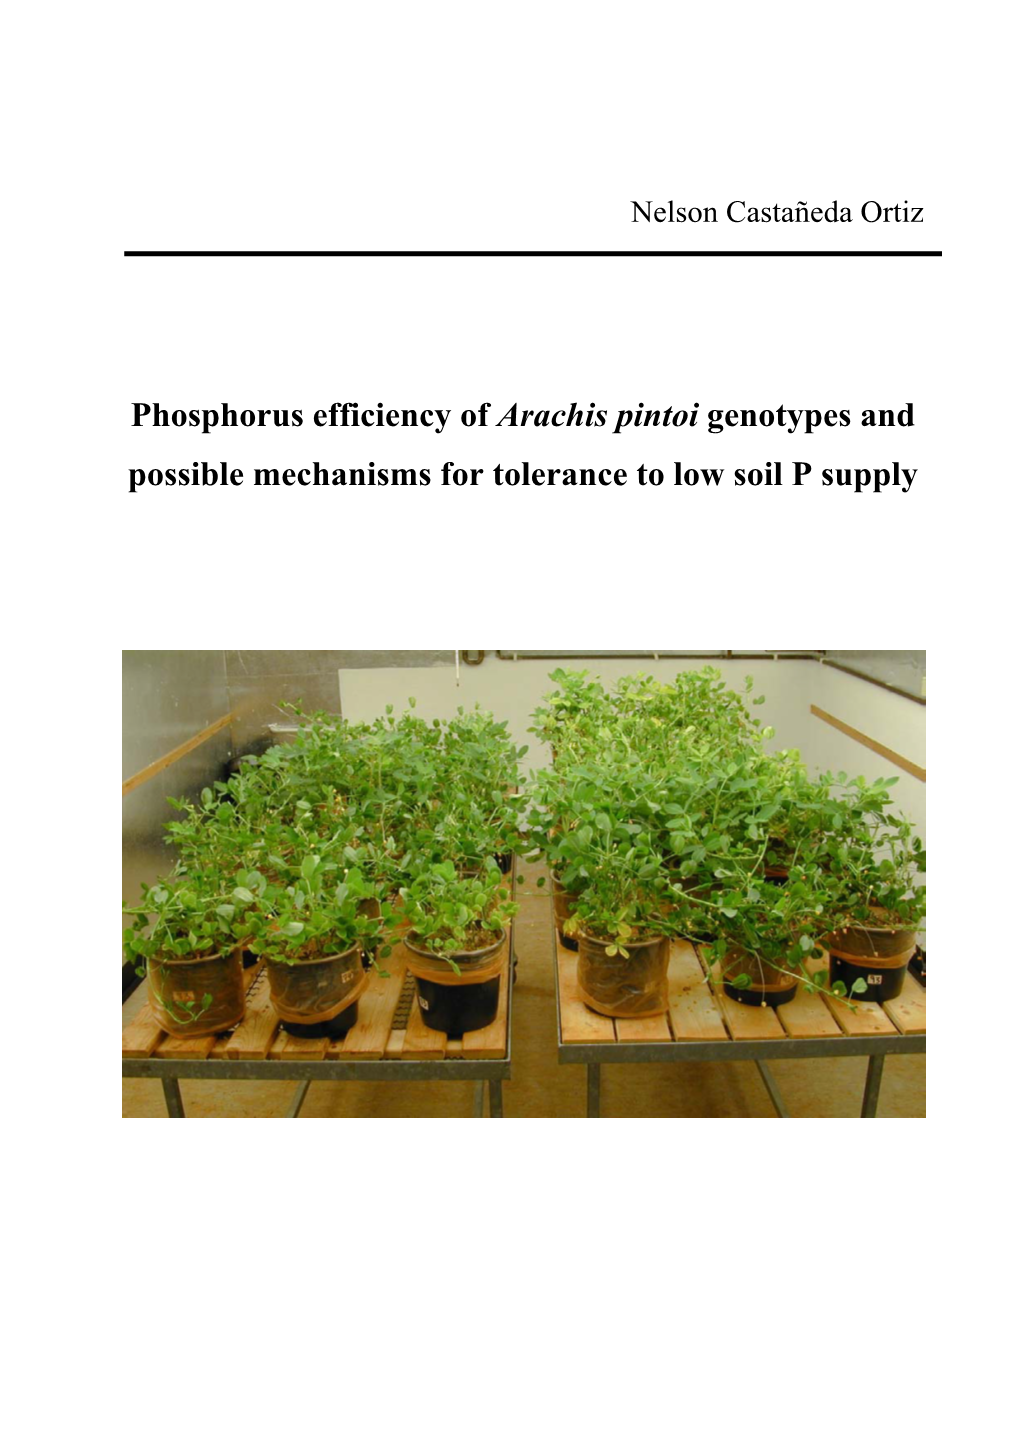 Phosphorus Efficiency of Arachis Pintoi Genotypes and Possible Mechanisms for Tolerance to Low Soil P Supply